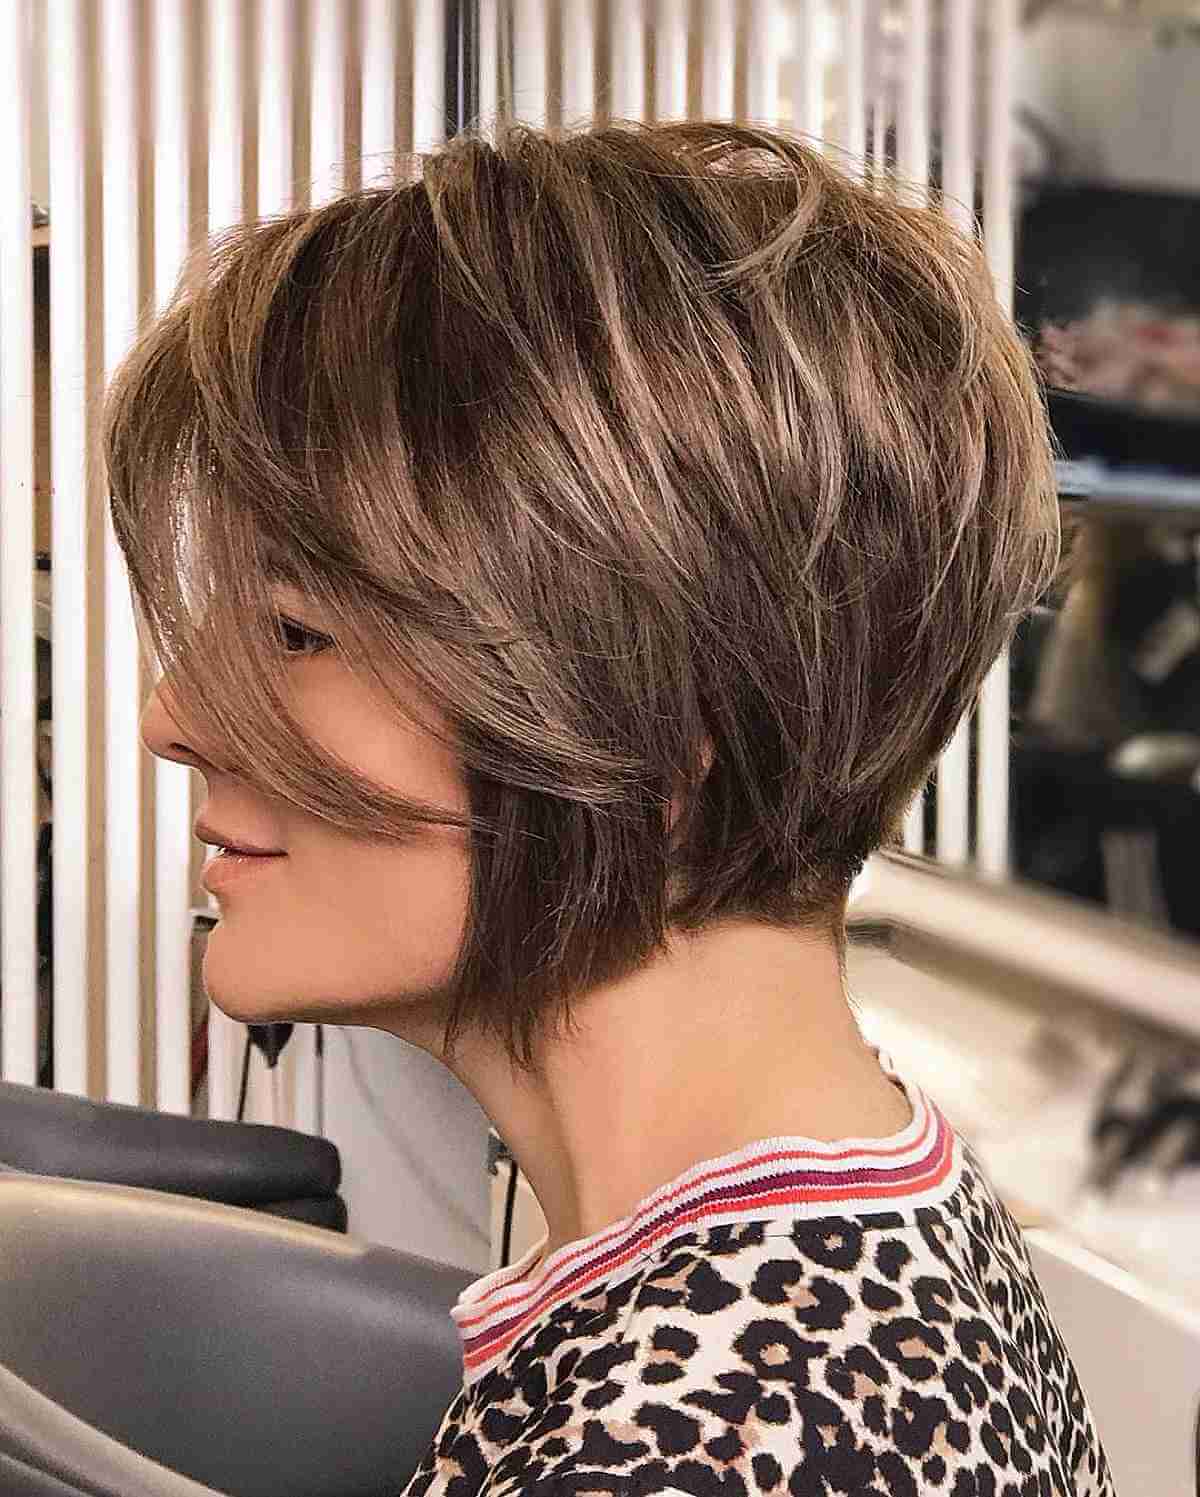 Short Textured Pixie Bob with Stacked Layers